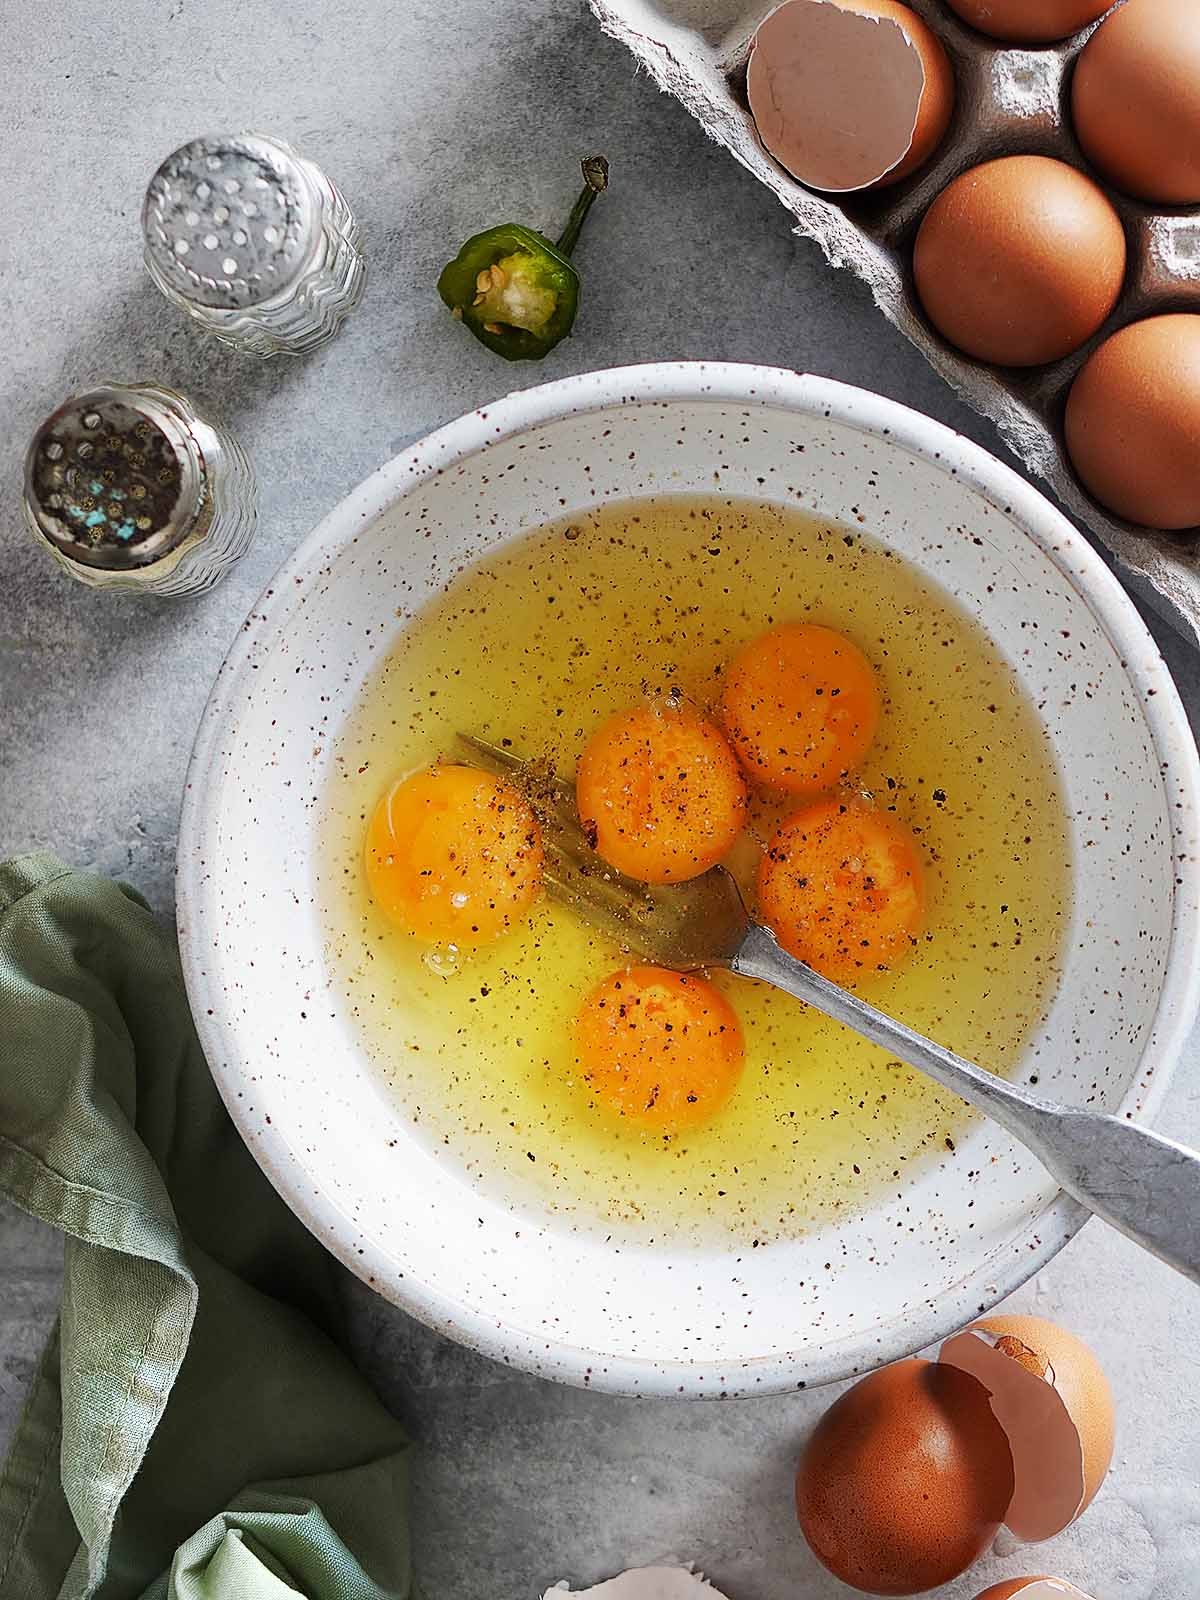 Five eggs inside a bowl sprinkled with salt and pepper.